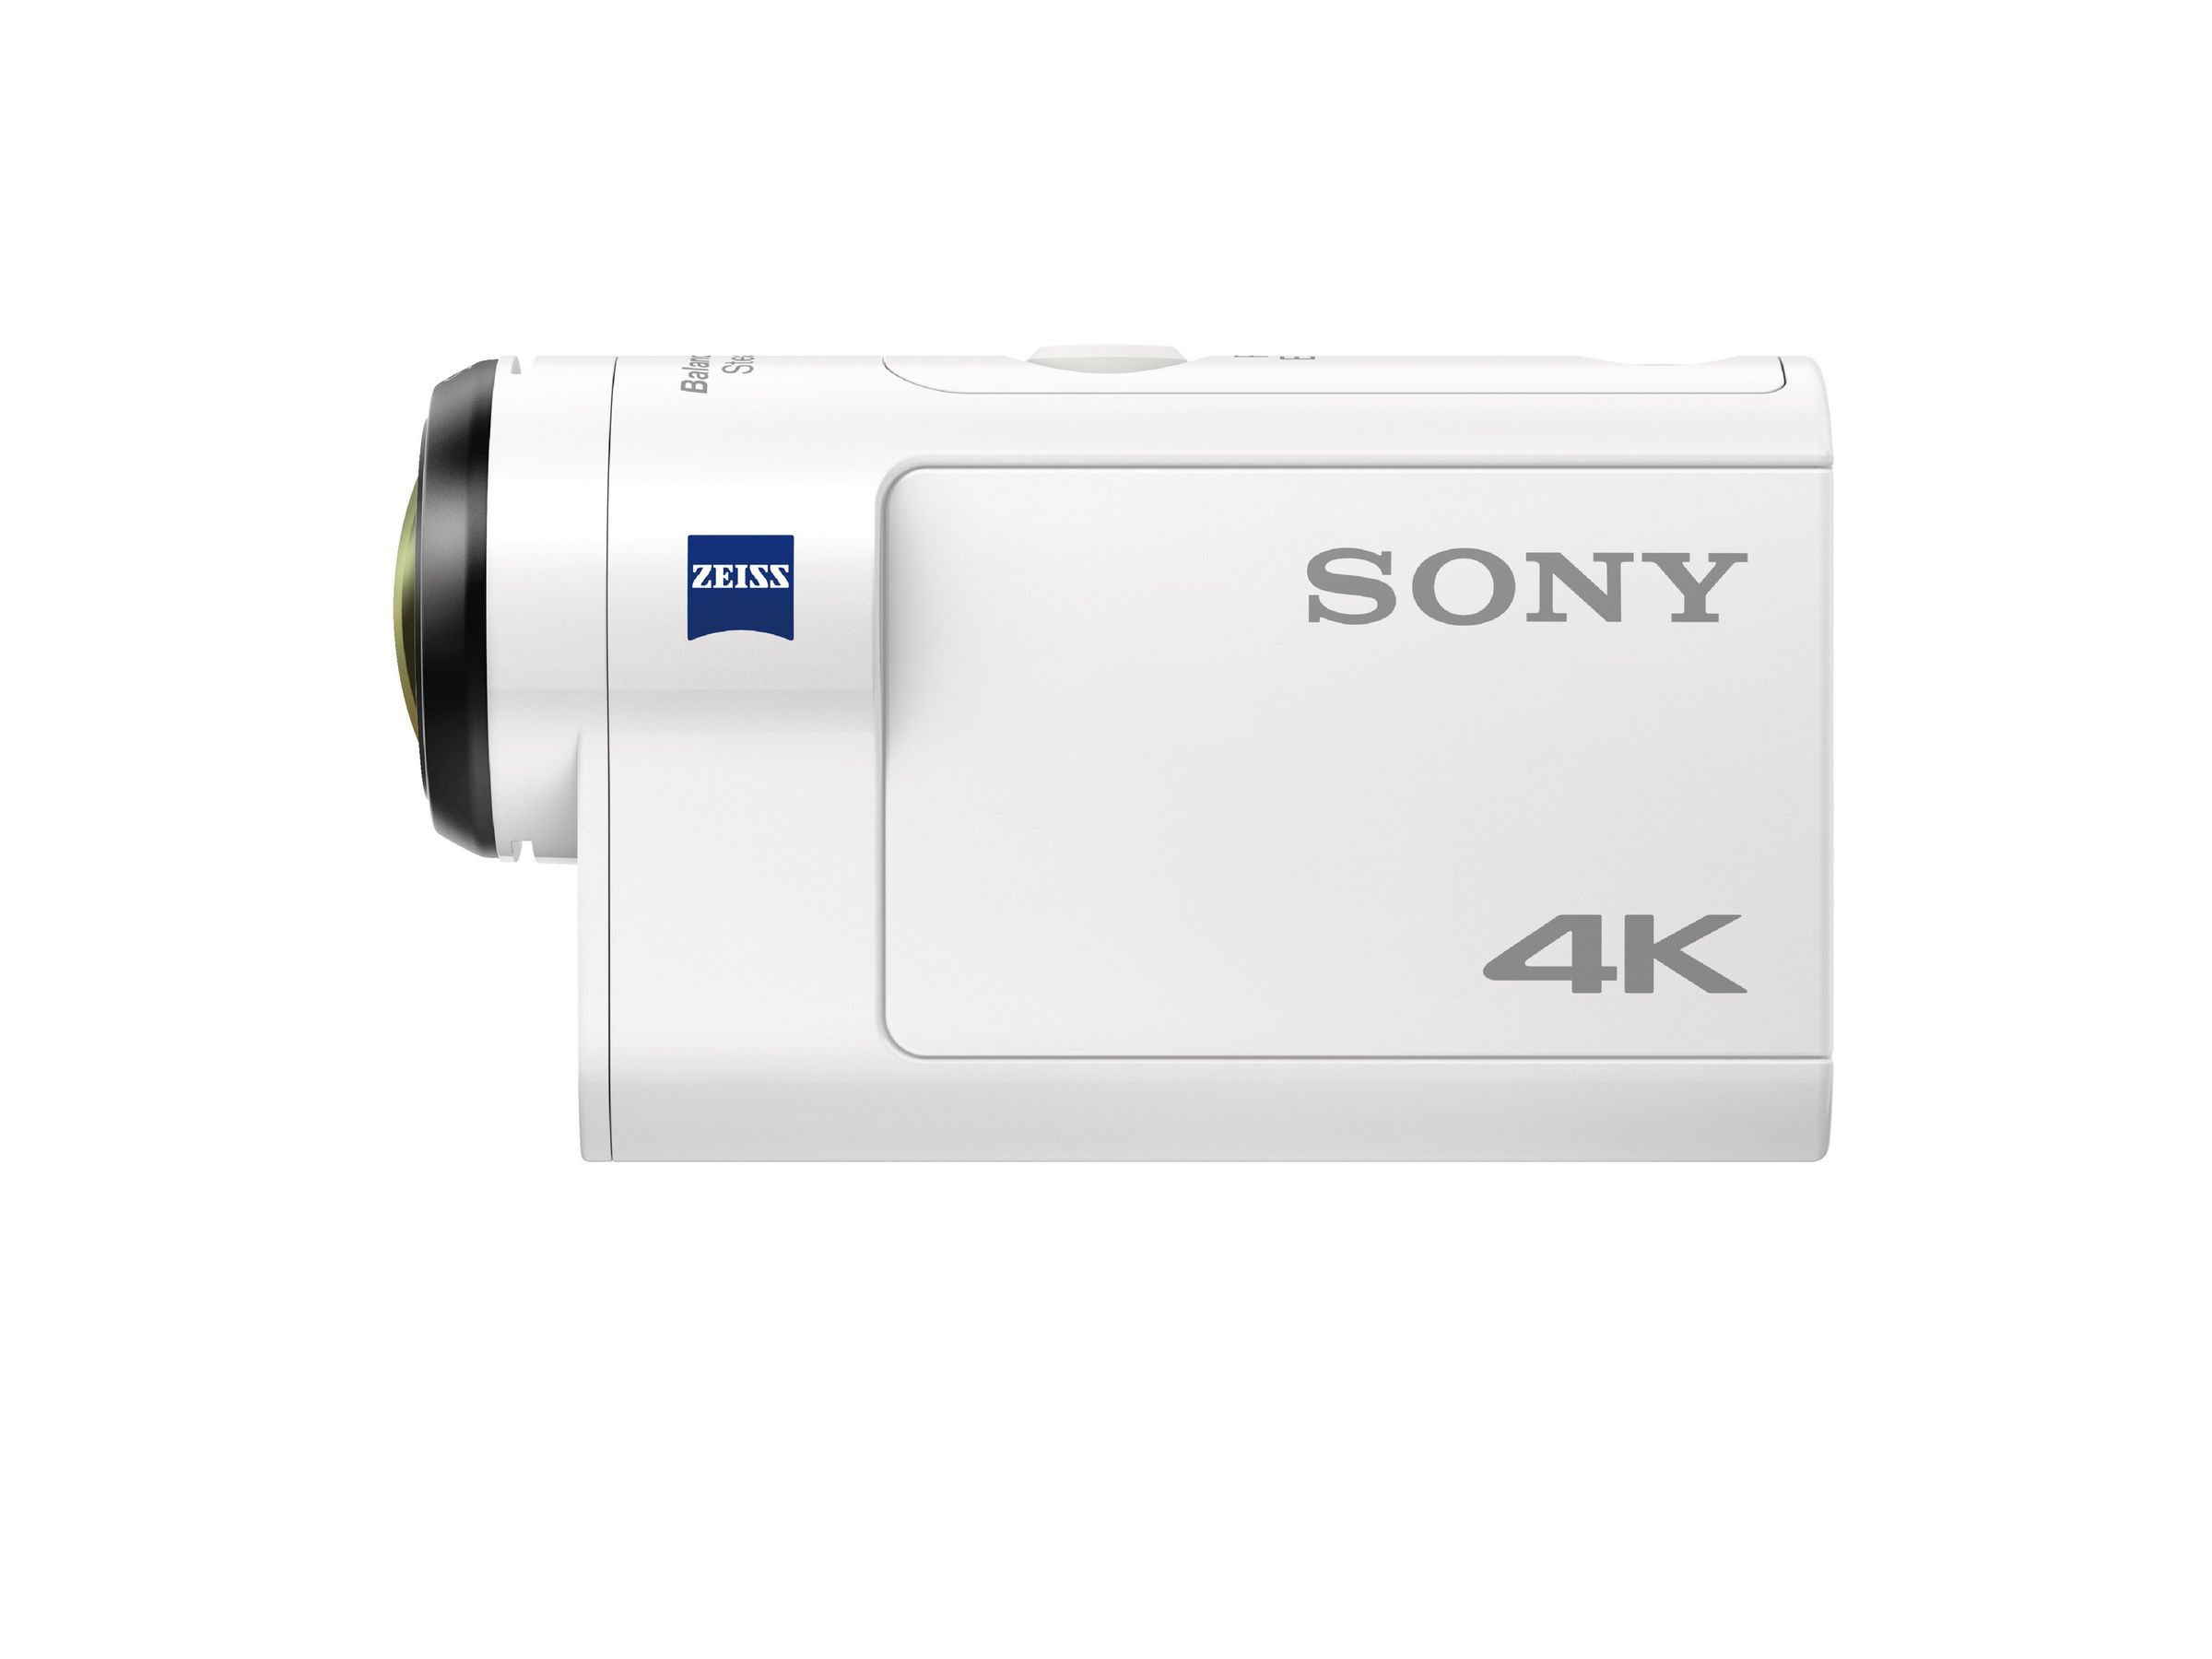 Sony's new 4K Action Cam in photos